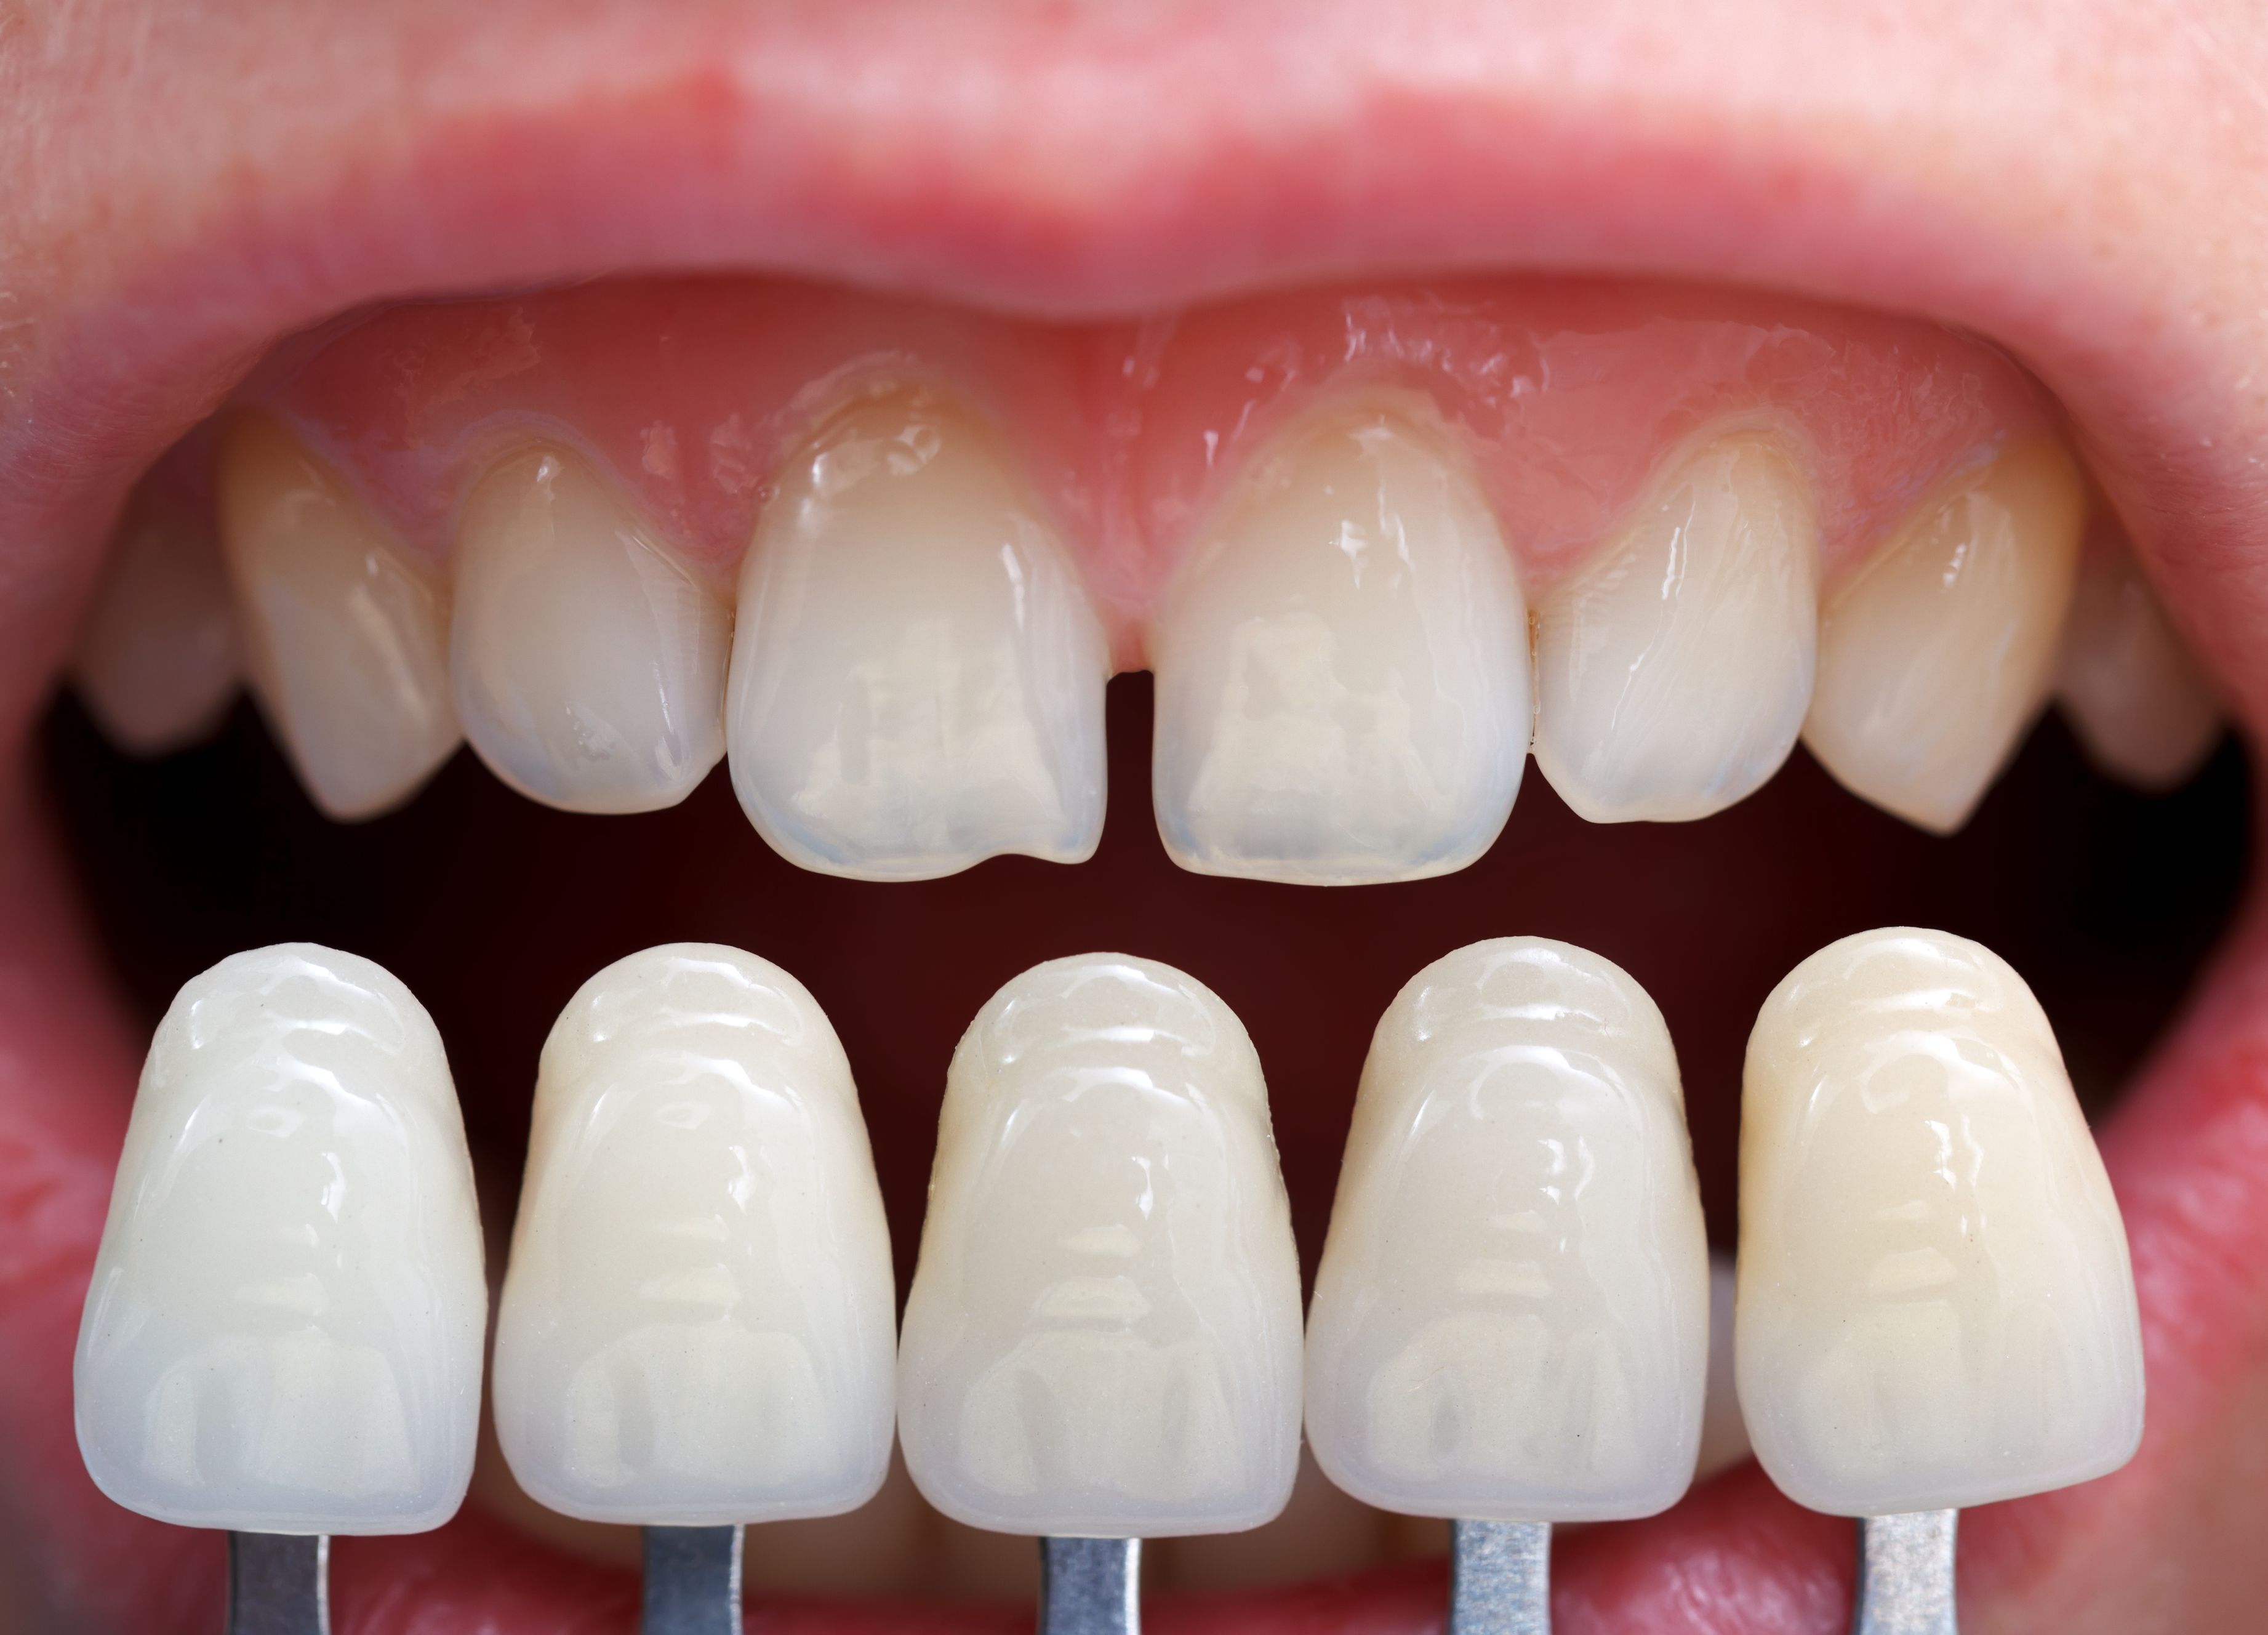 Where can I find a Cosmetic Dentist in Fremont?